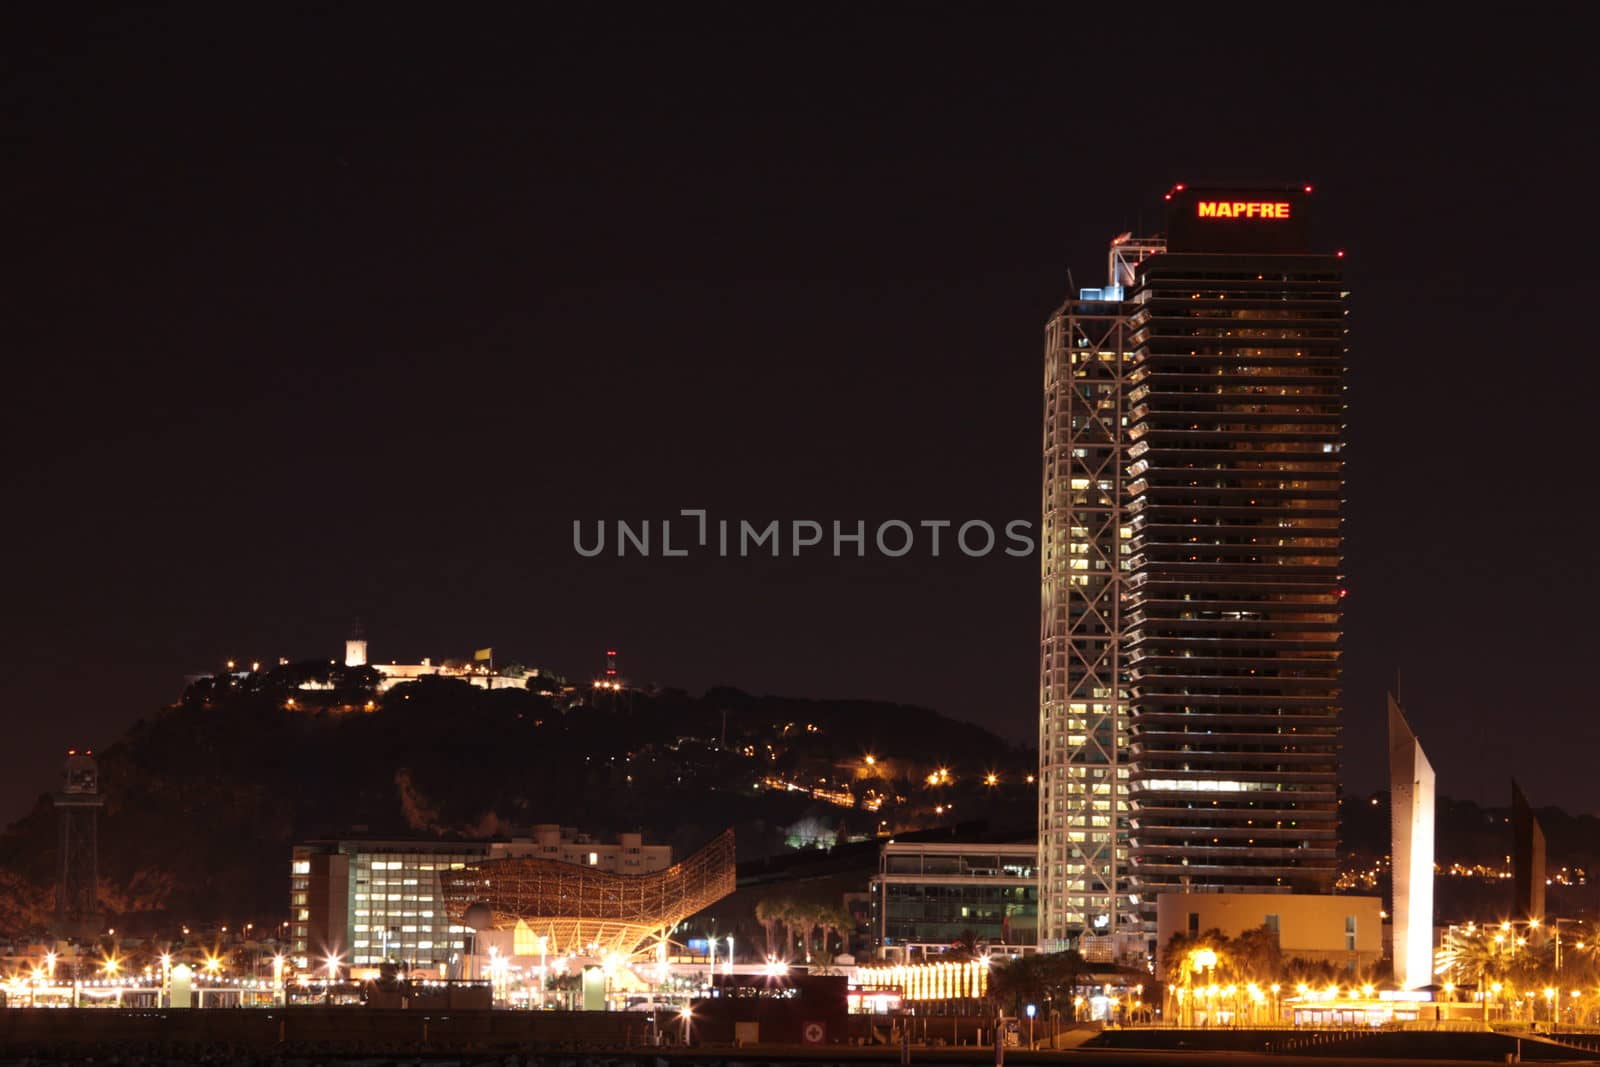 Barcelona, Spain - 24 July 2013: View of Torre Mapfre and Hotel Arts Barcelona at night